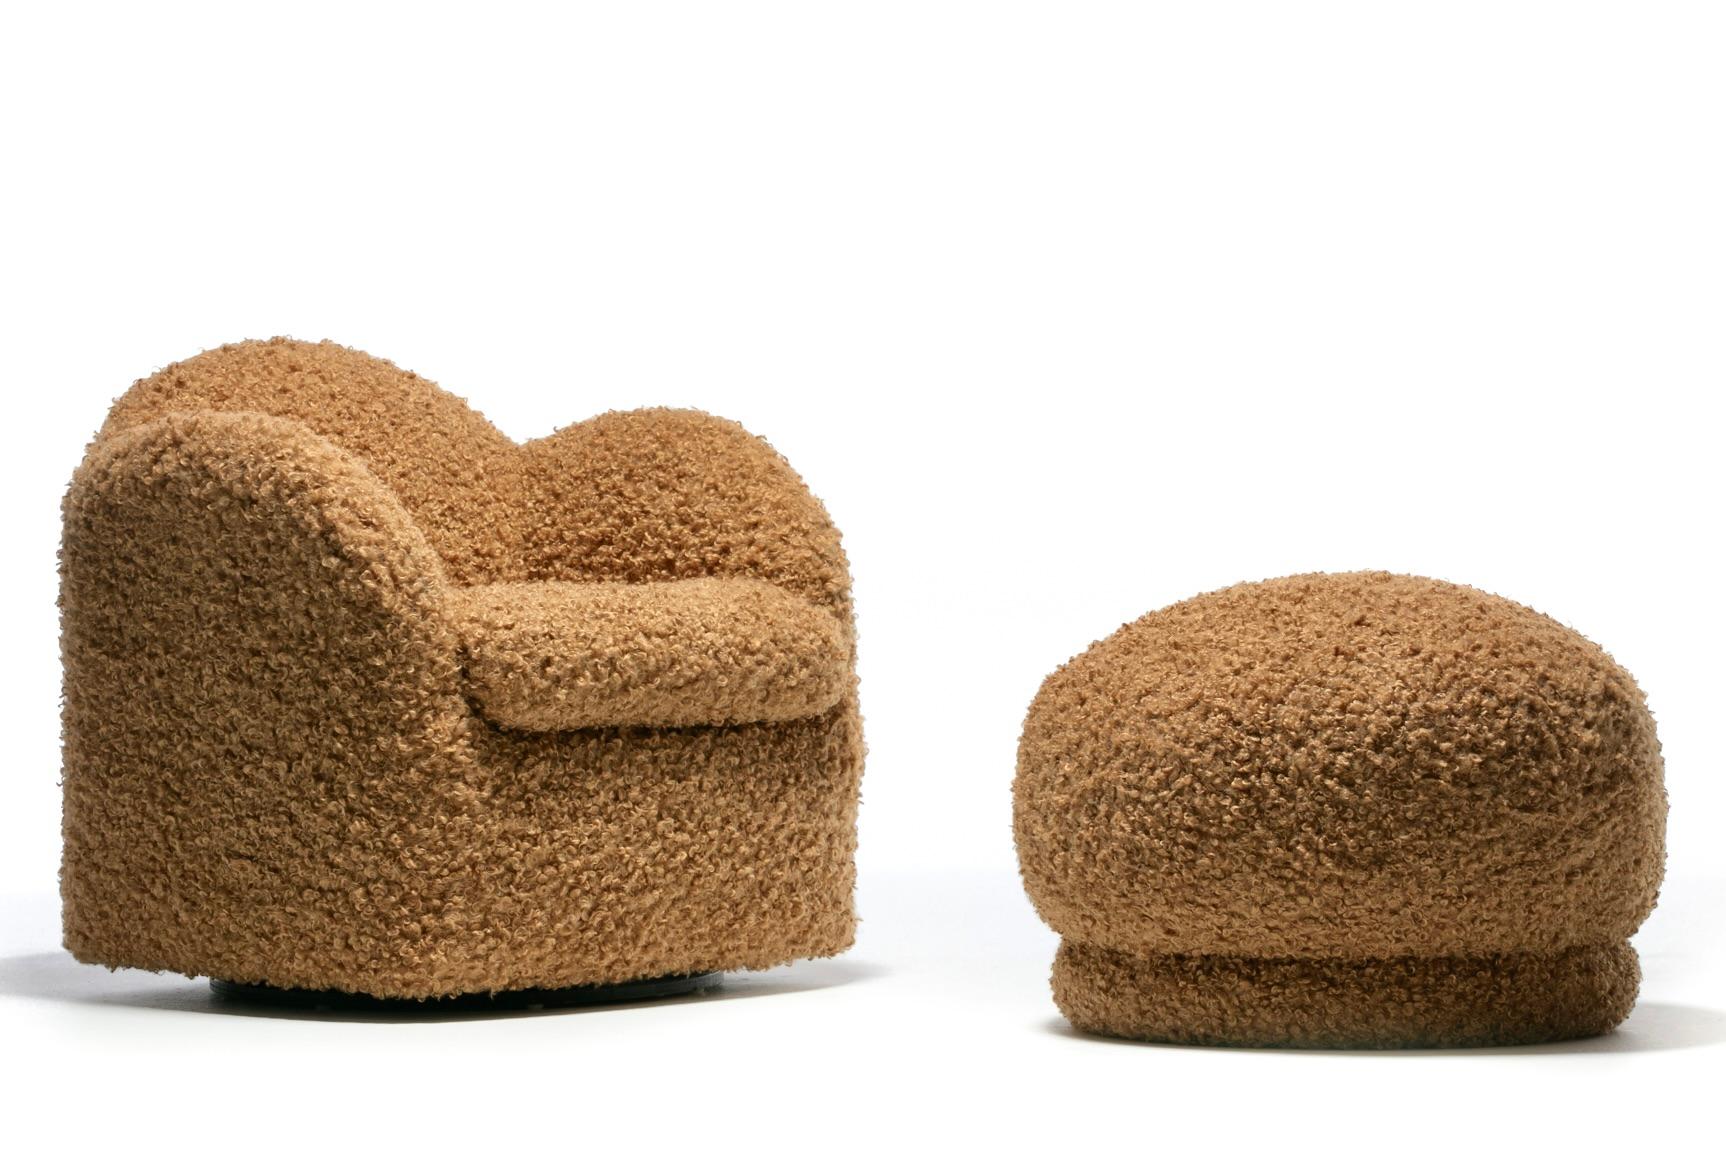 Timelessly sexy pair of poufs ottomans by Directional professionally reupholstered in soft camel teddy bear fabric rated highly durable. Upholstered pouf rests atop a channeled upholstered base. Modern look. Sculptural. Plush. Comfortable. The poufs